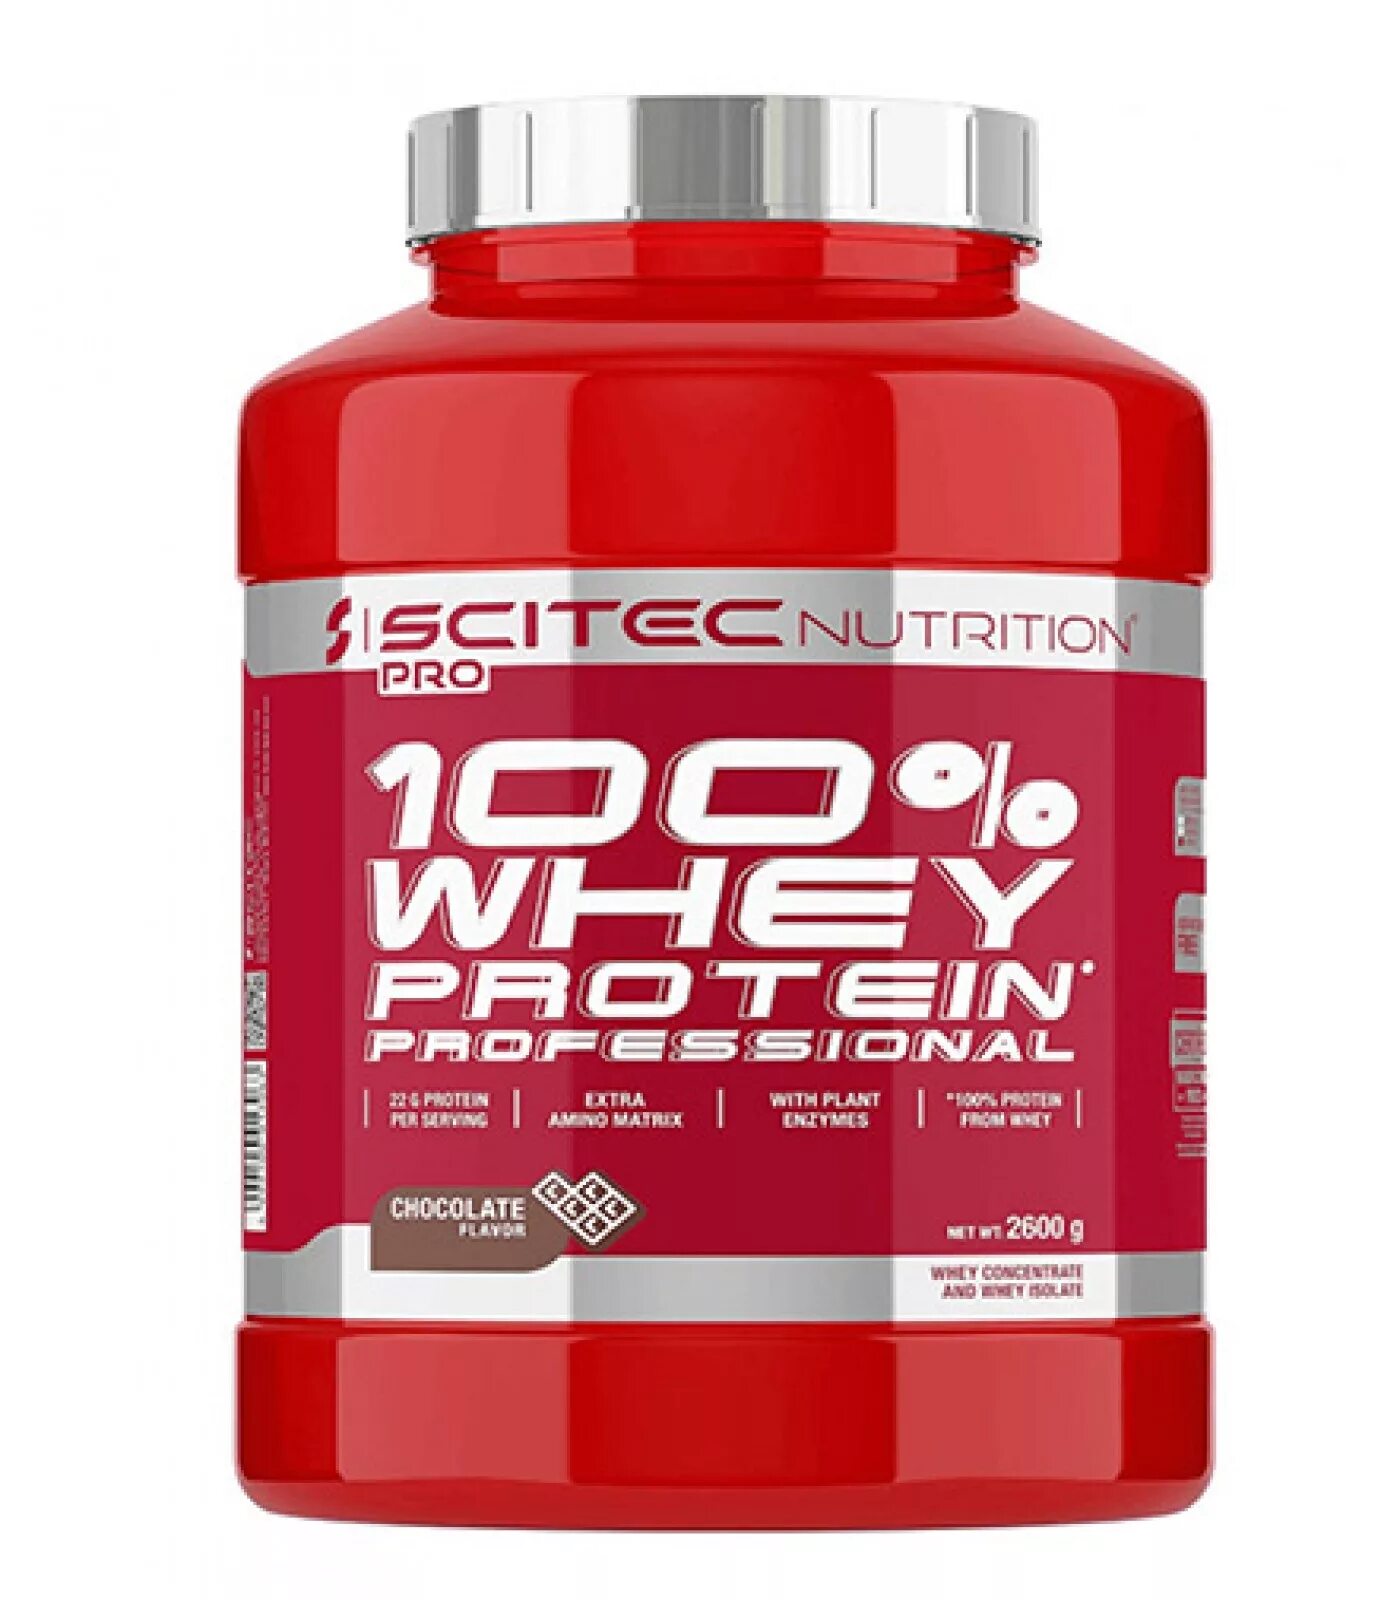 Scitec Nutrition 100 Whey Protein professional. Scitec Nutrition - 100% Whey Protein professional (1 порция). Scitec Nutrition Whey Extra Amino. Scitec Nutrition 100 Whey Protein professional logo.